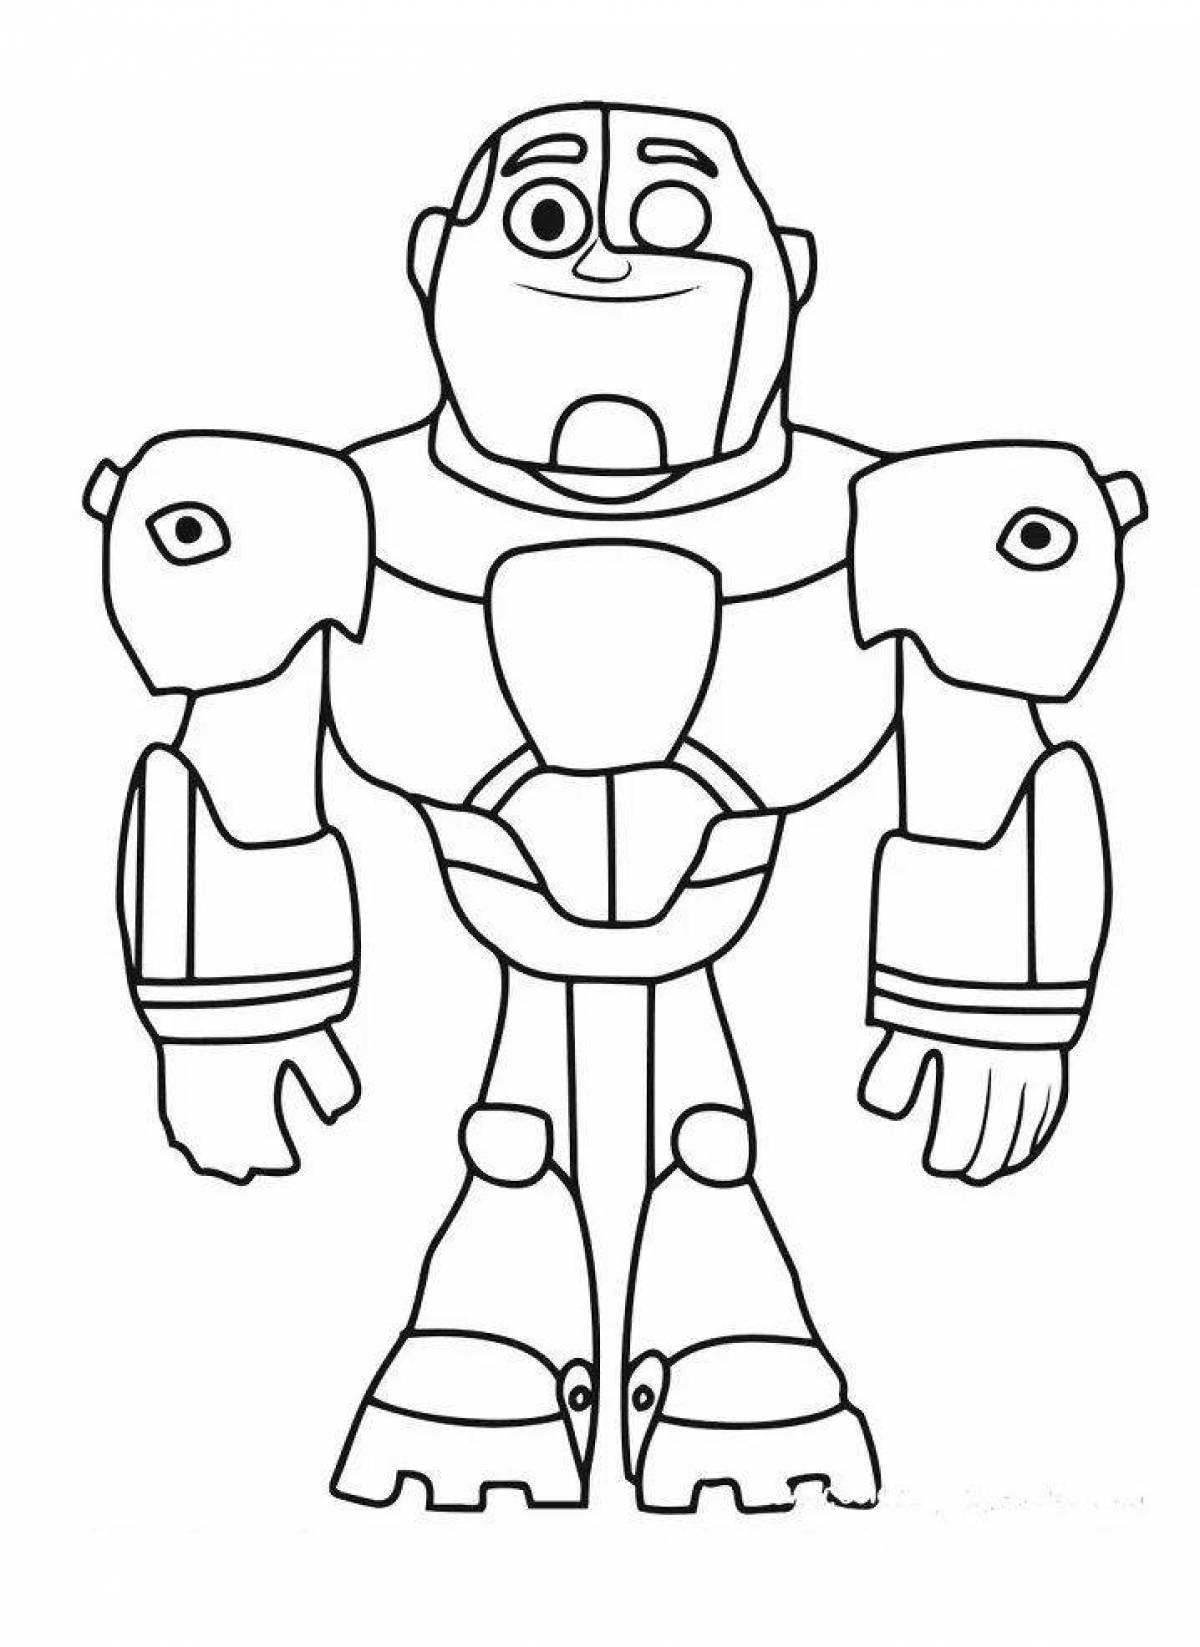 Cyborg coloring page